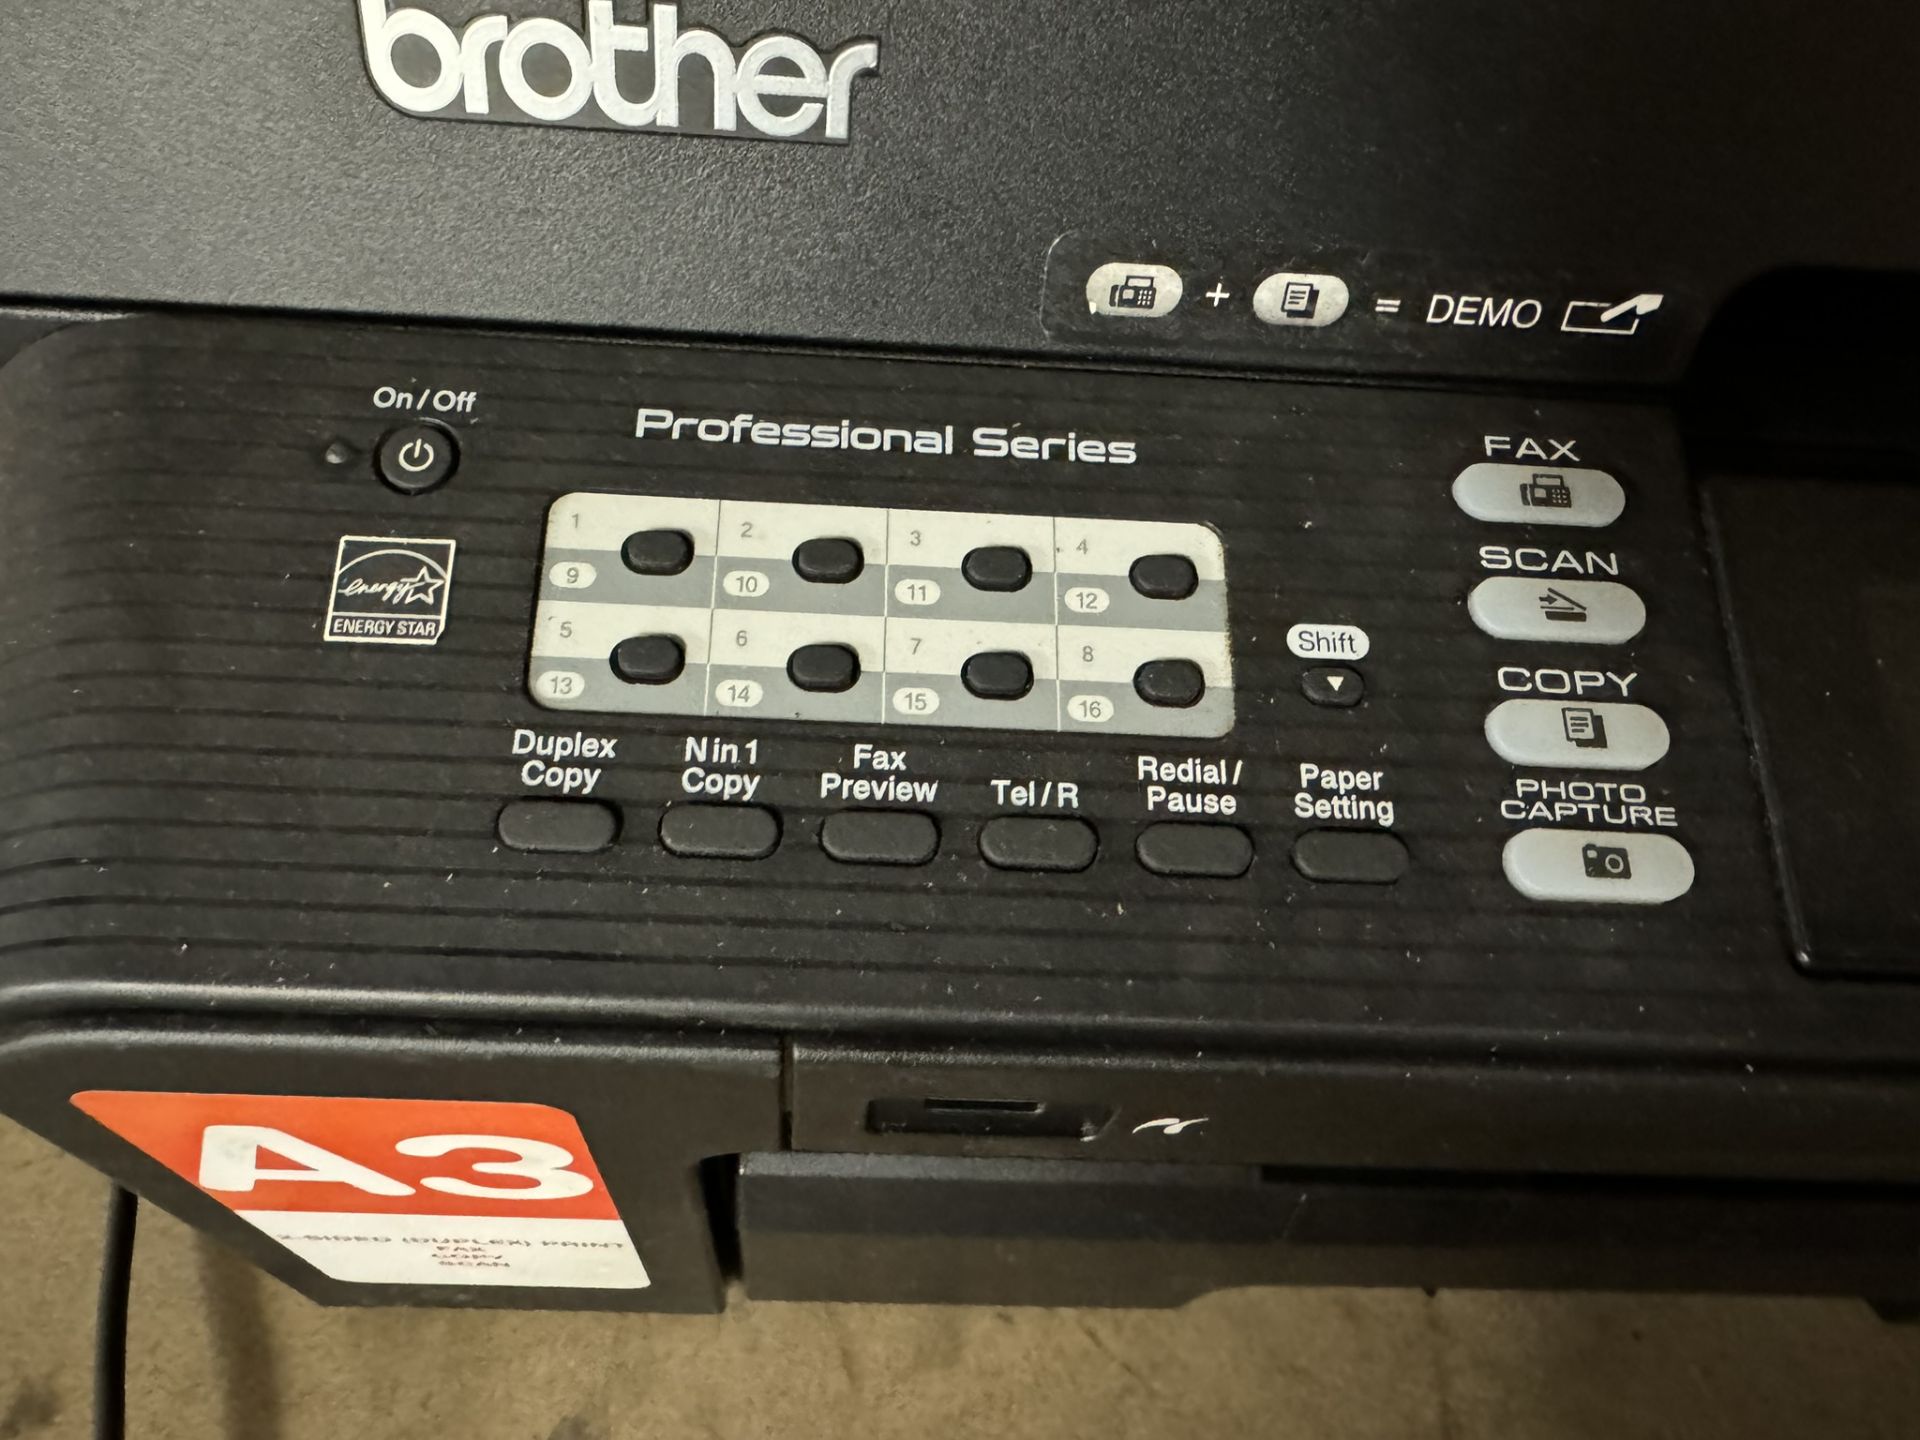 Brother MFCJ6510DW All In One Colour Printer - Image 4 of 6